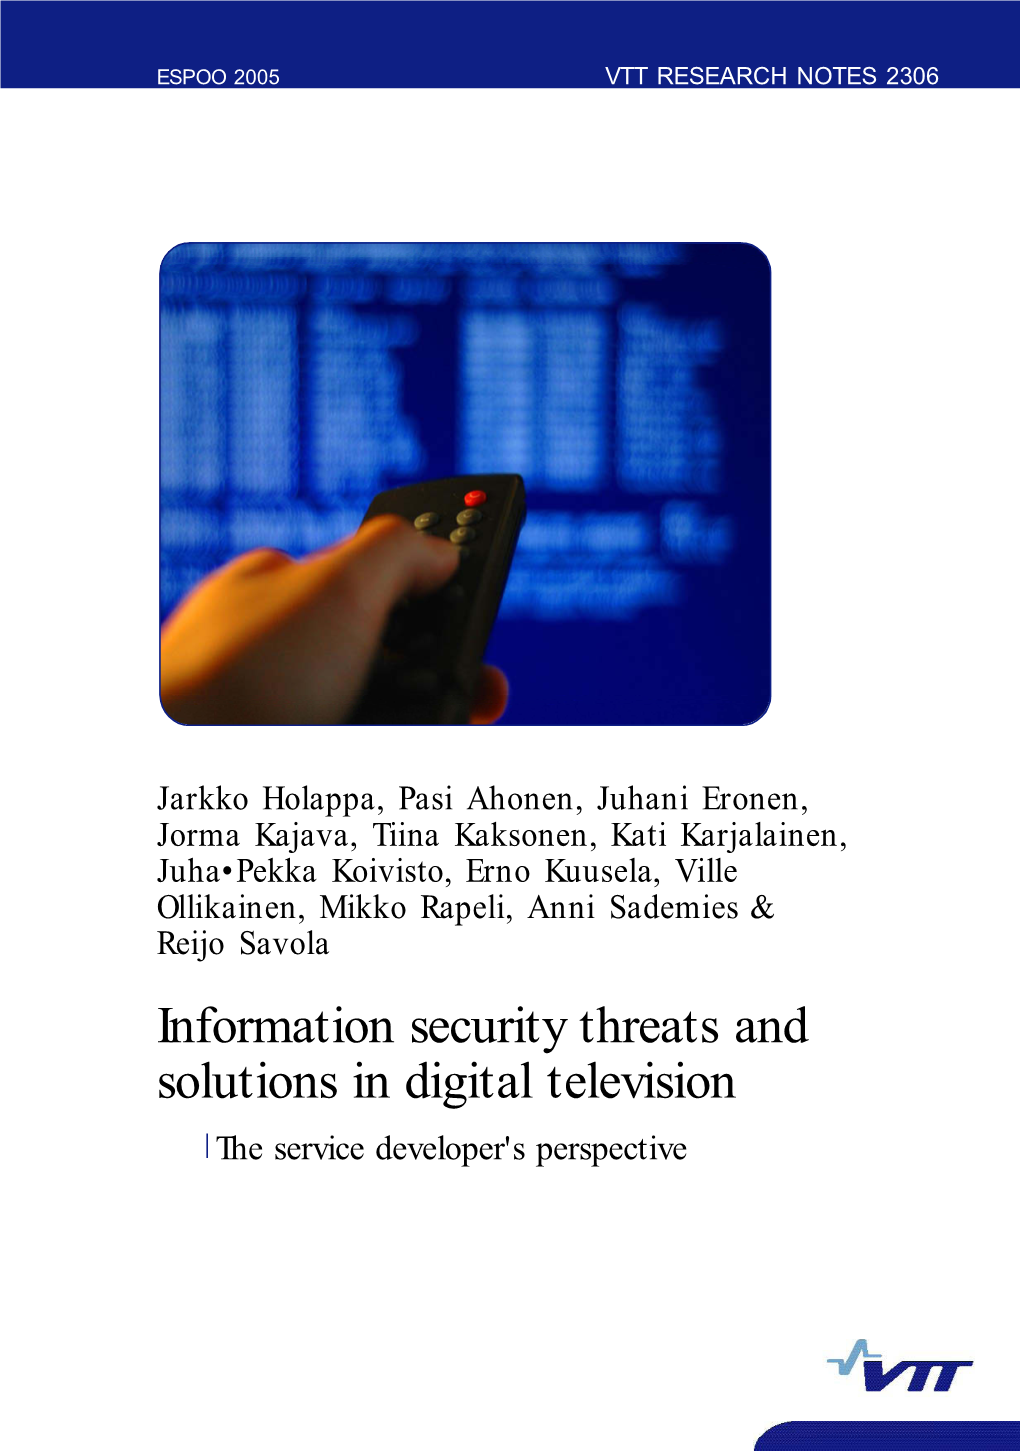 Information Security Threats and Solutions in Digital Television. the Service Developer´S Perspective